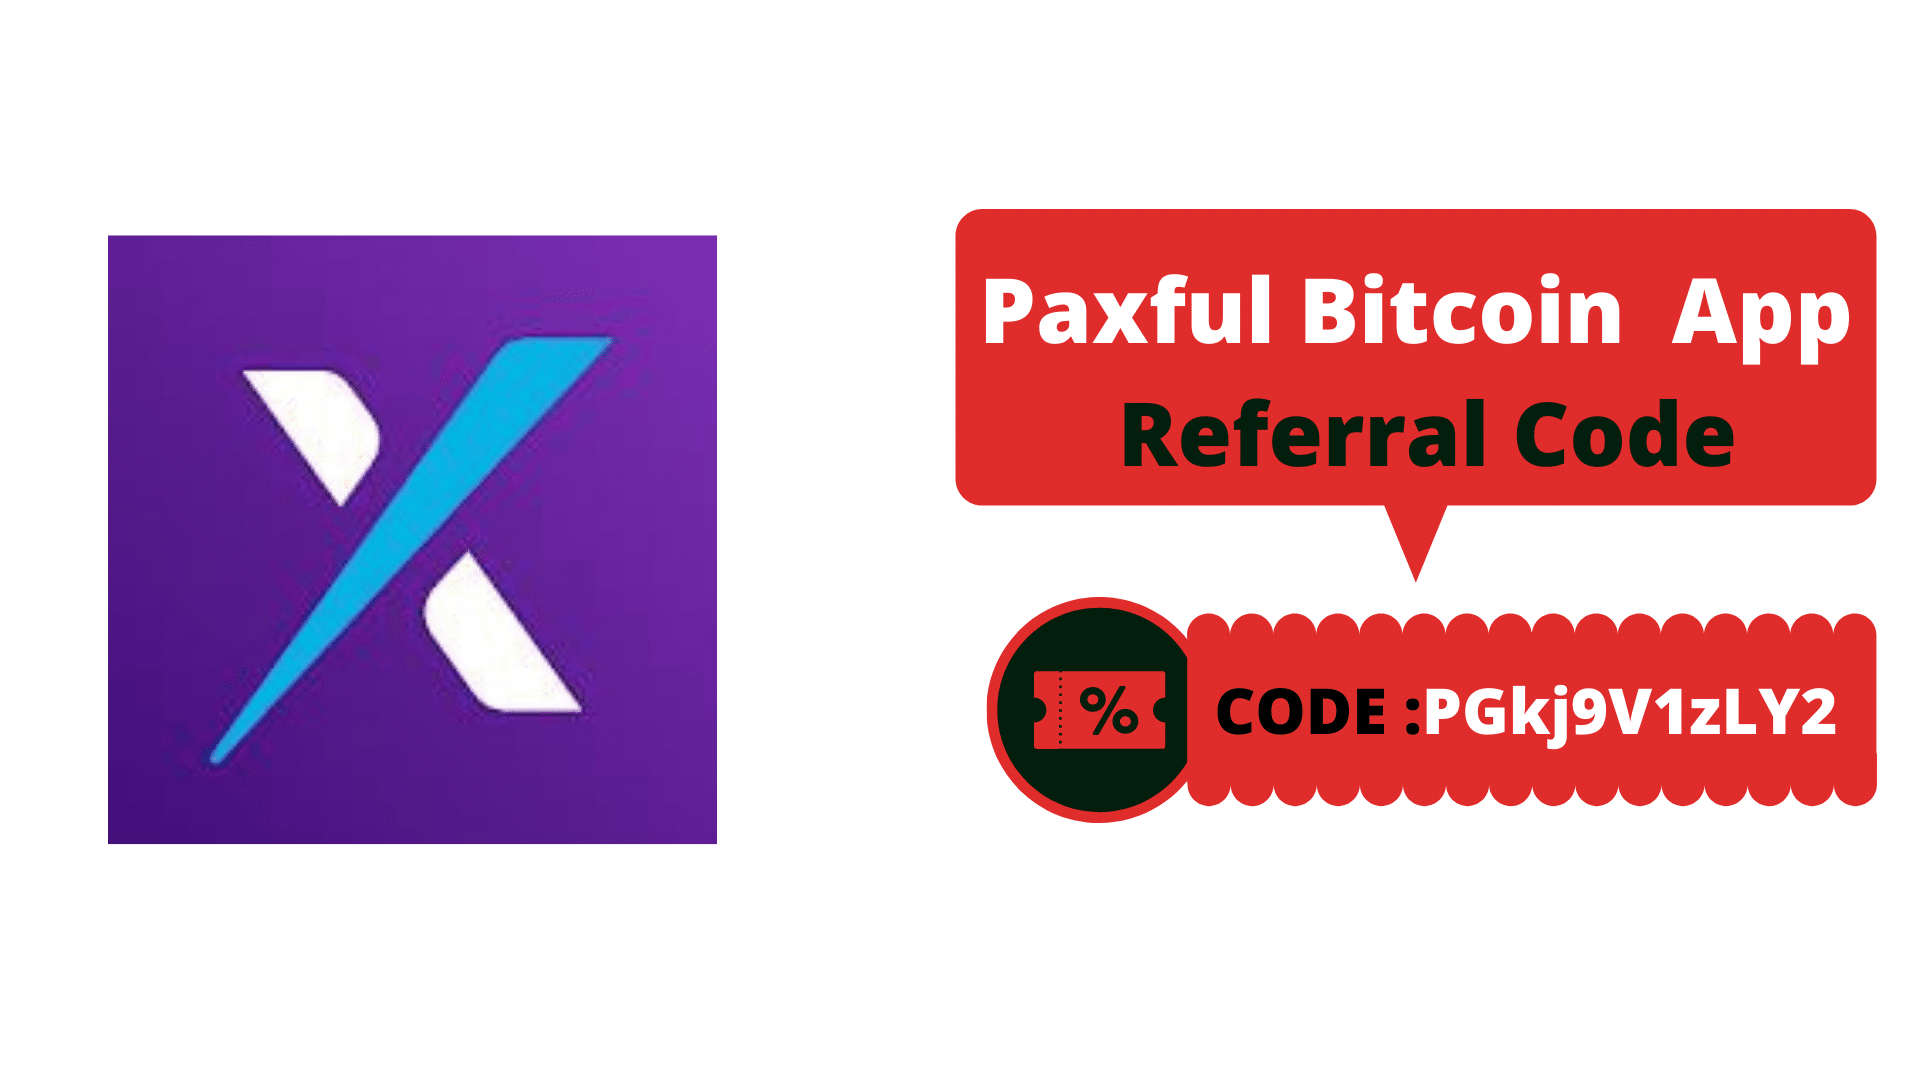 Paxful Referral Code